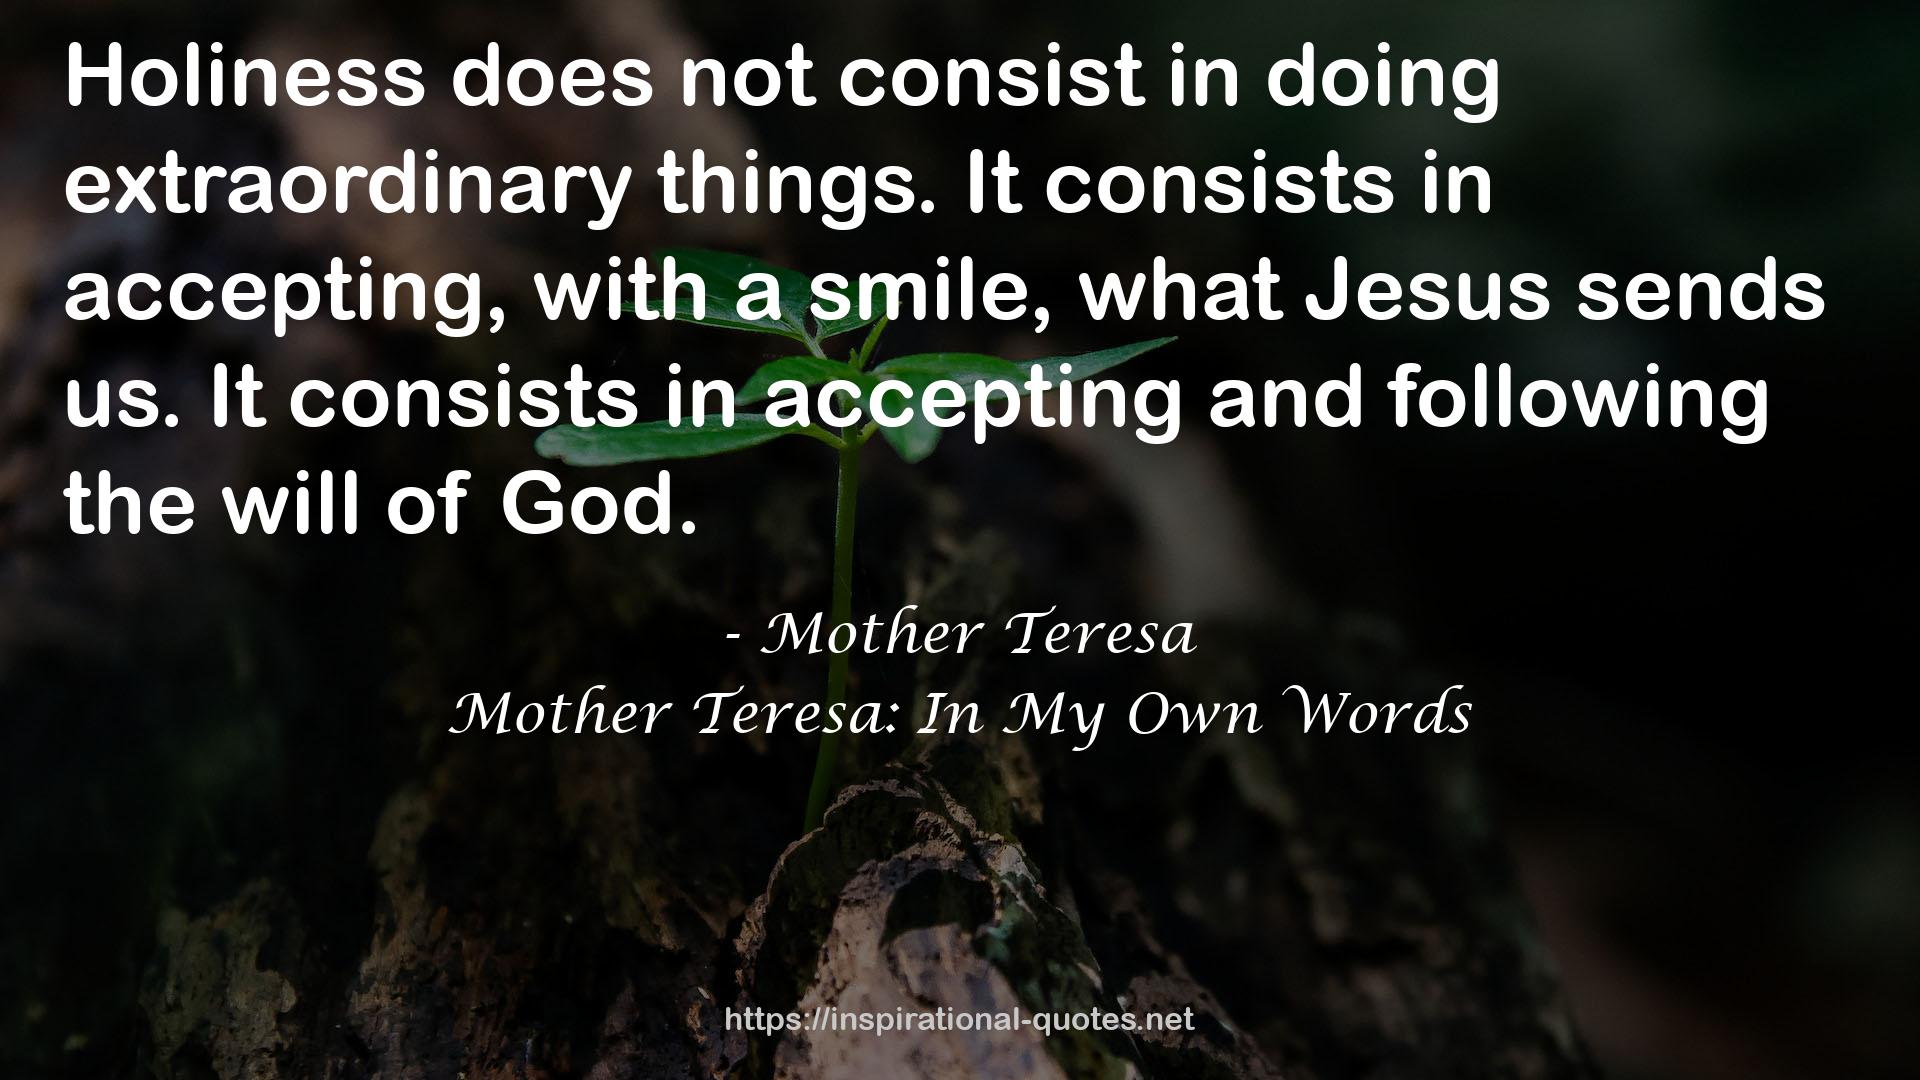 Mother Teresa: In My Own Words QUOTES